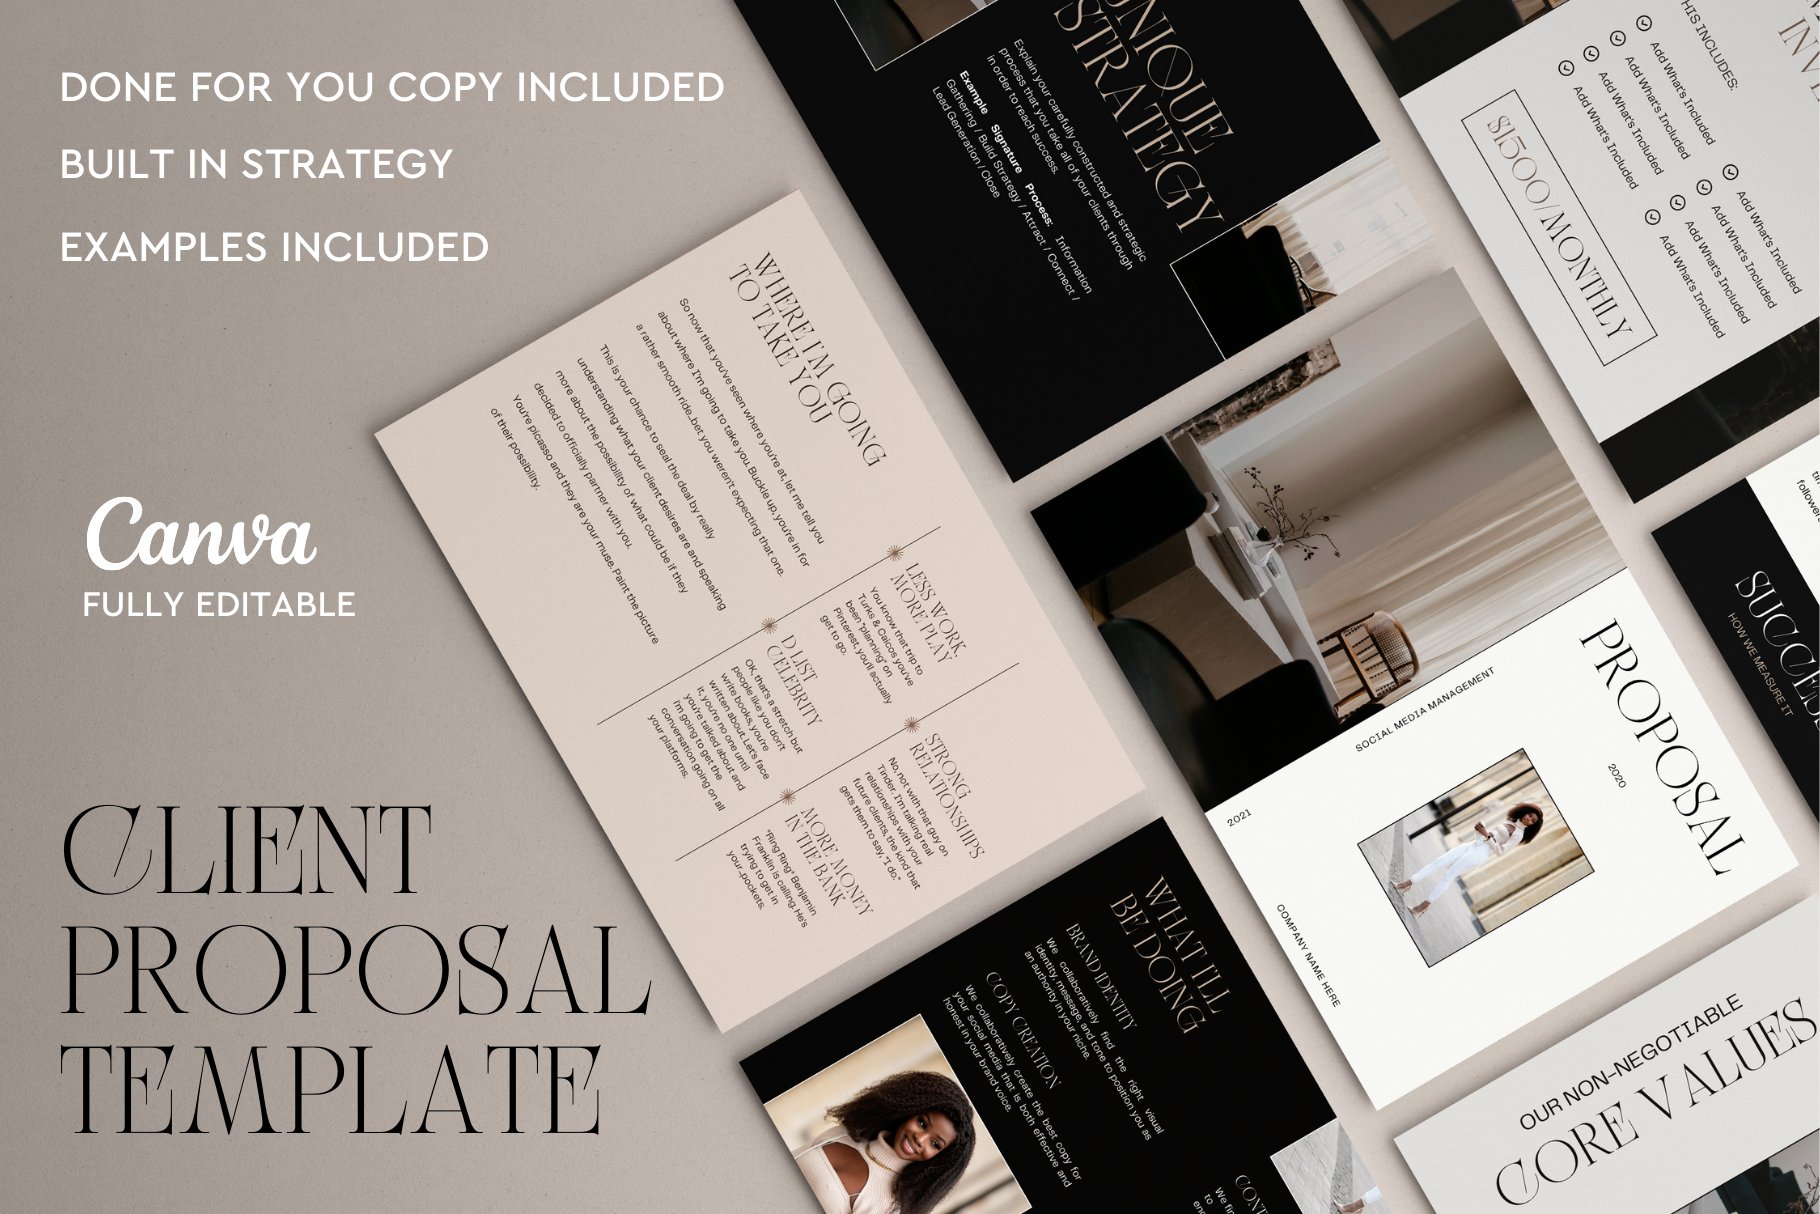 Modern Client Proposal Template cover image.